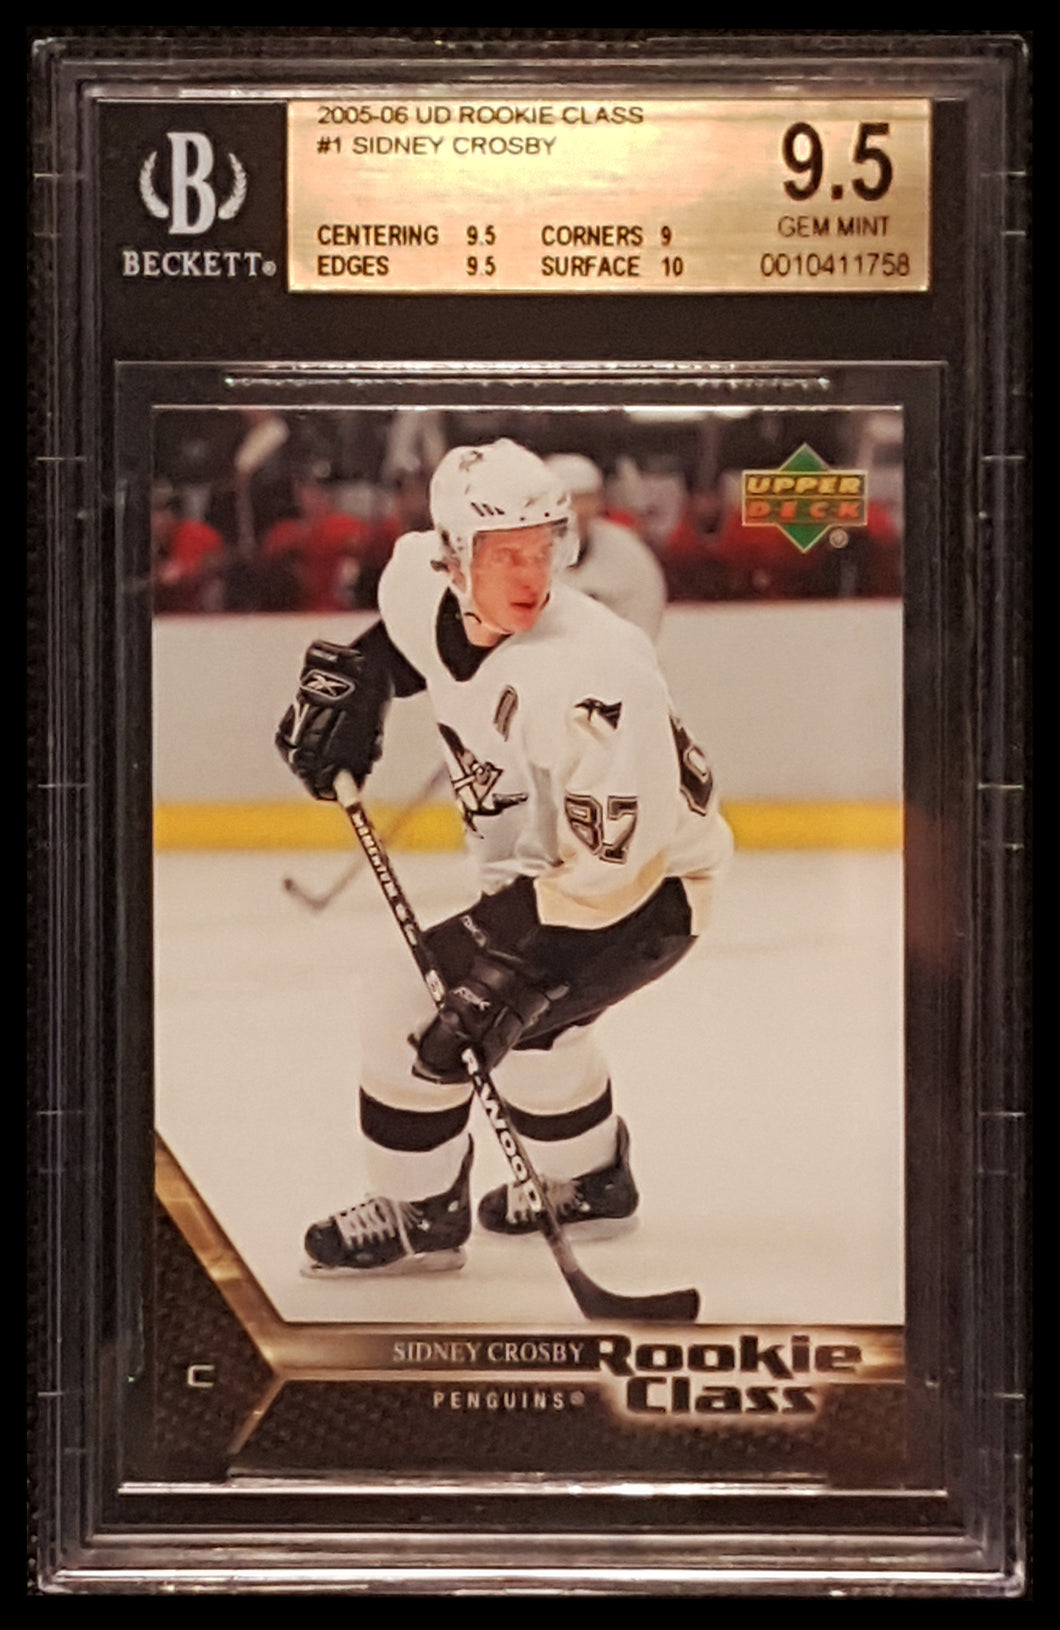 2005-06-UD Upper Deck Rookie Class #1 Sidney Crosby Rookie RC - BGS 9.5